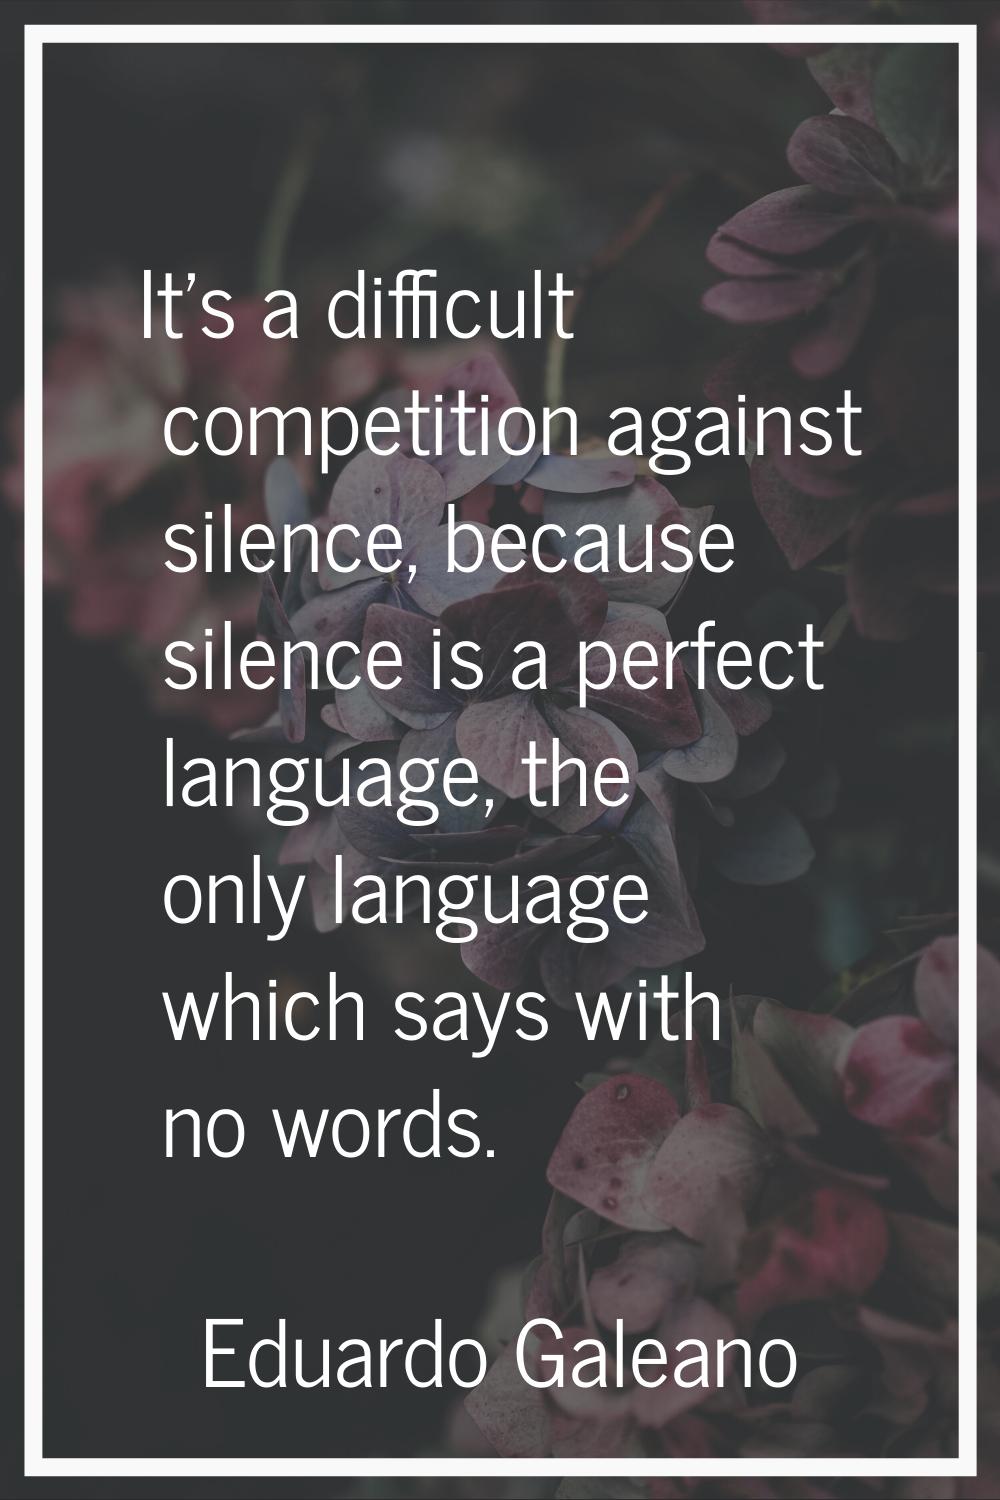 It's a difficult competition against silence, because silence is a perfect language, the only langu